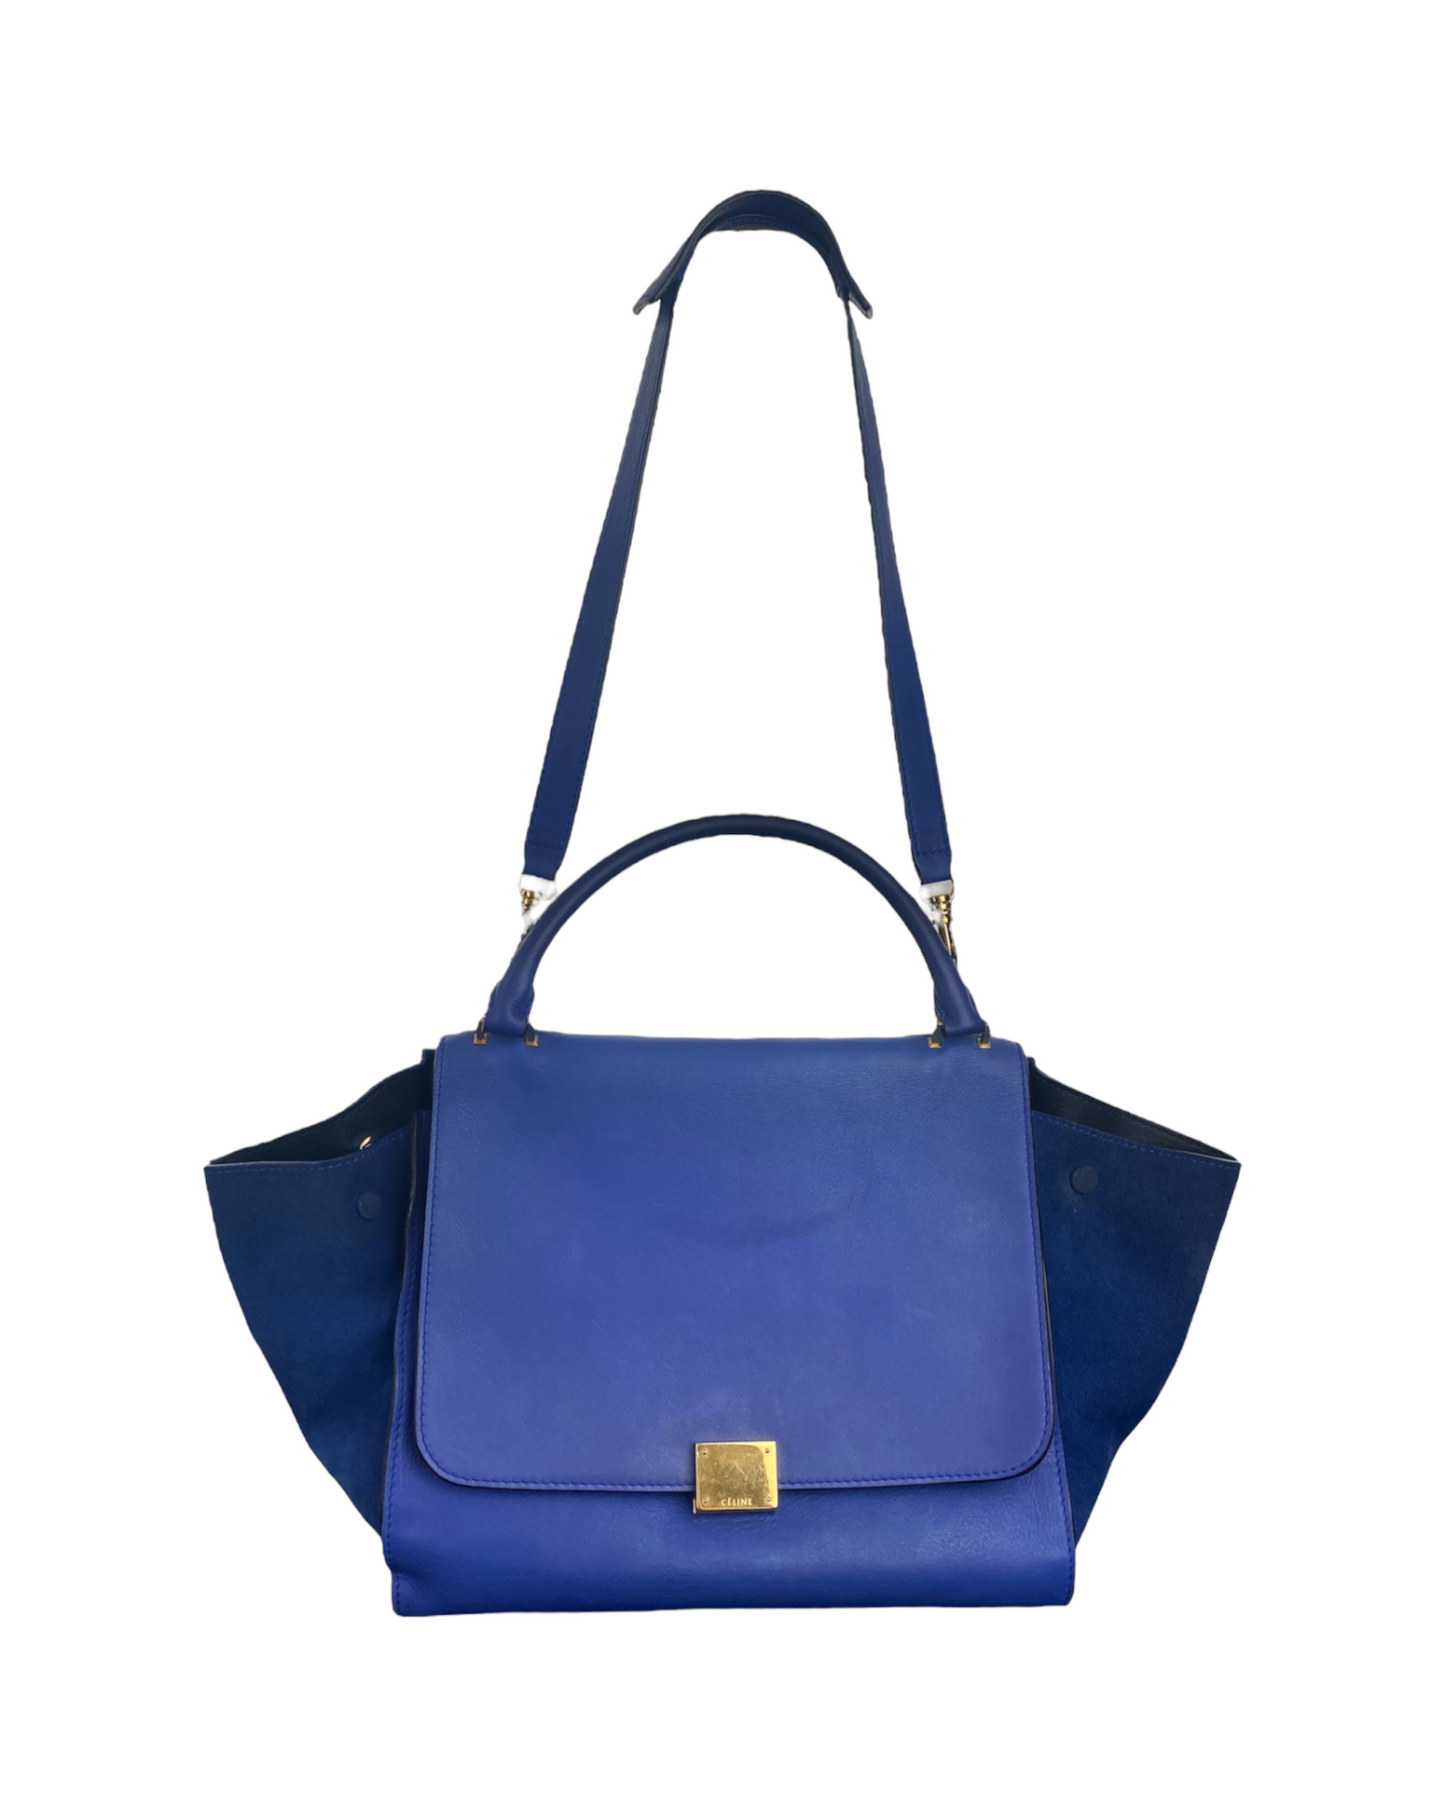 Celine Blue Leather and Suede Medium Trapeze Top Handle Bag